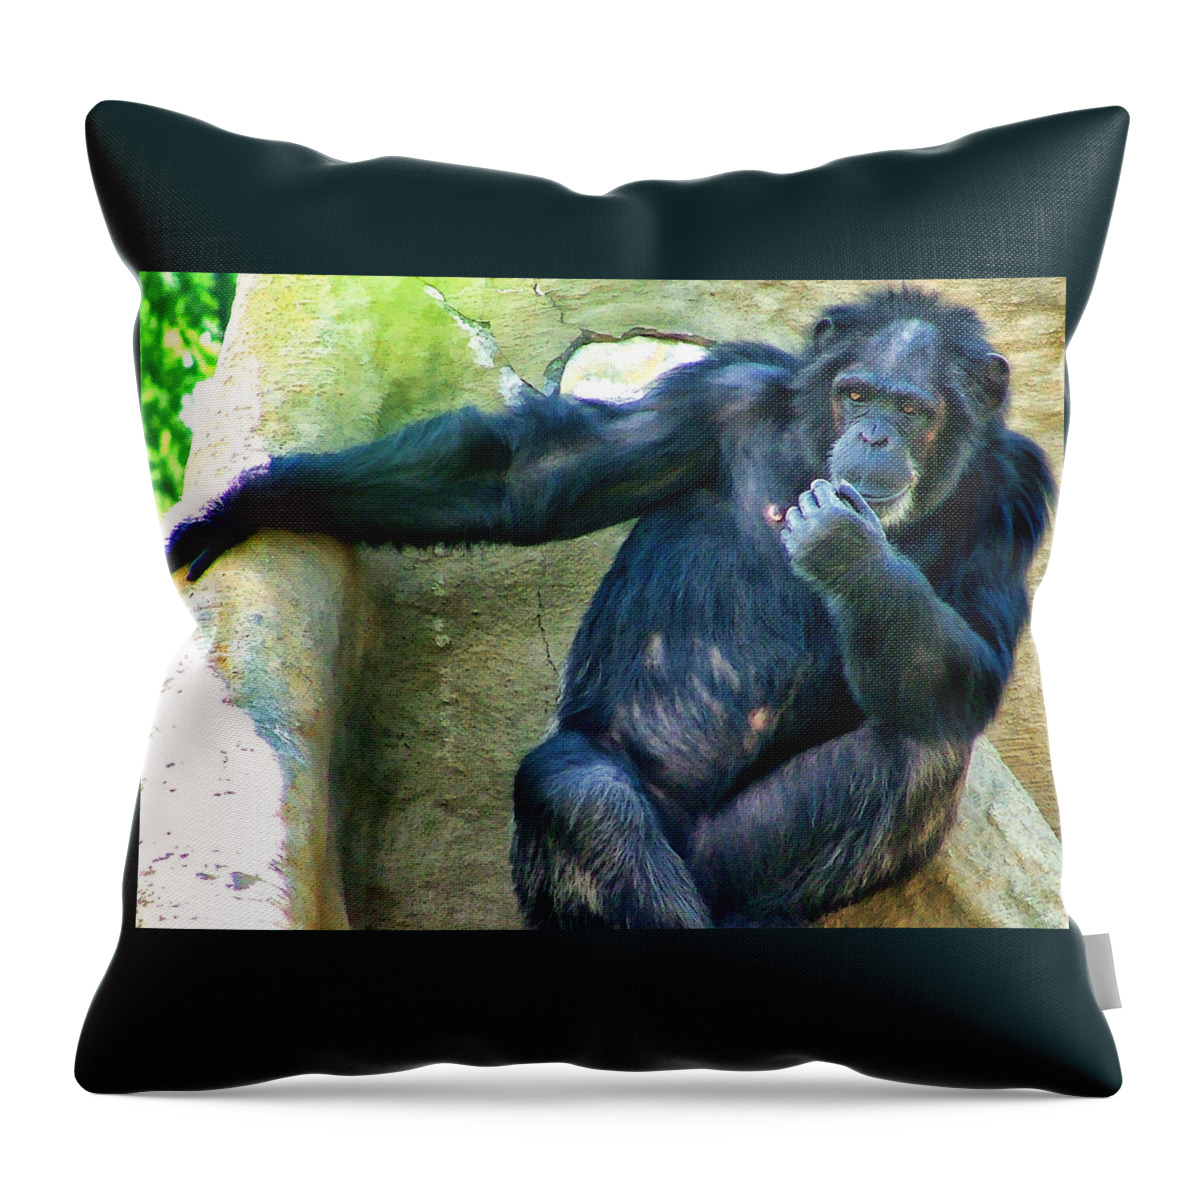 Primate Throw Pillow featuring the photograph Chimp 1 by Dawn Eshelman